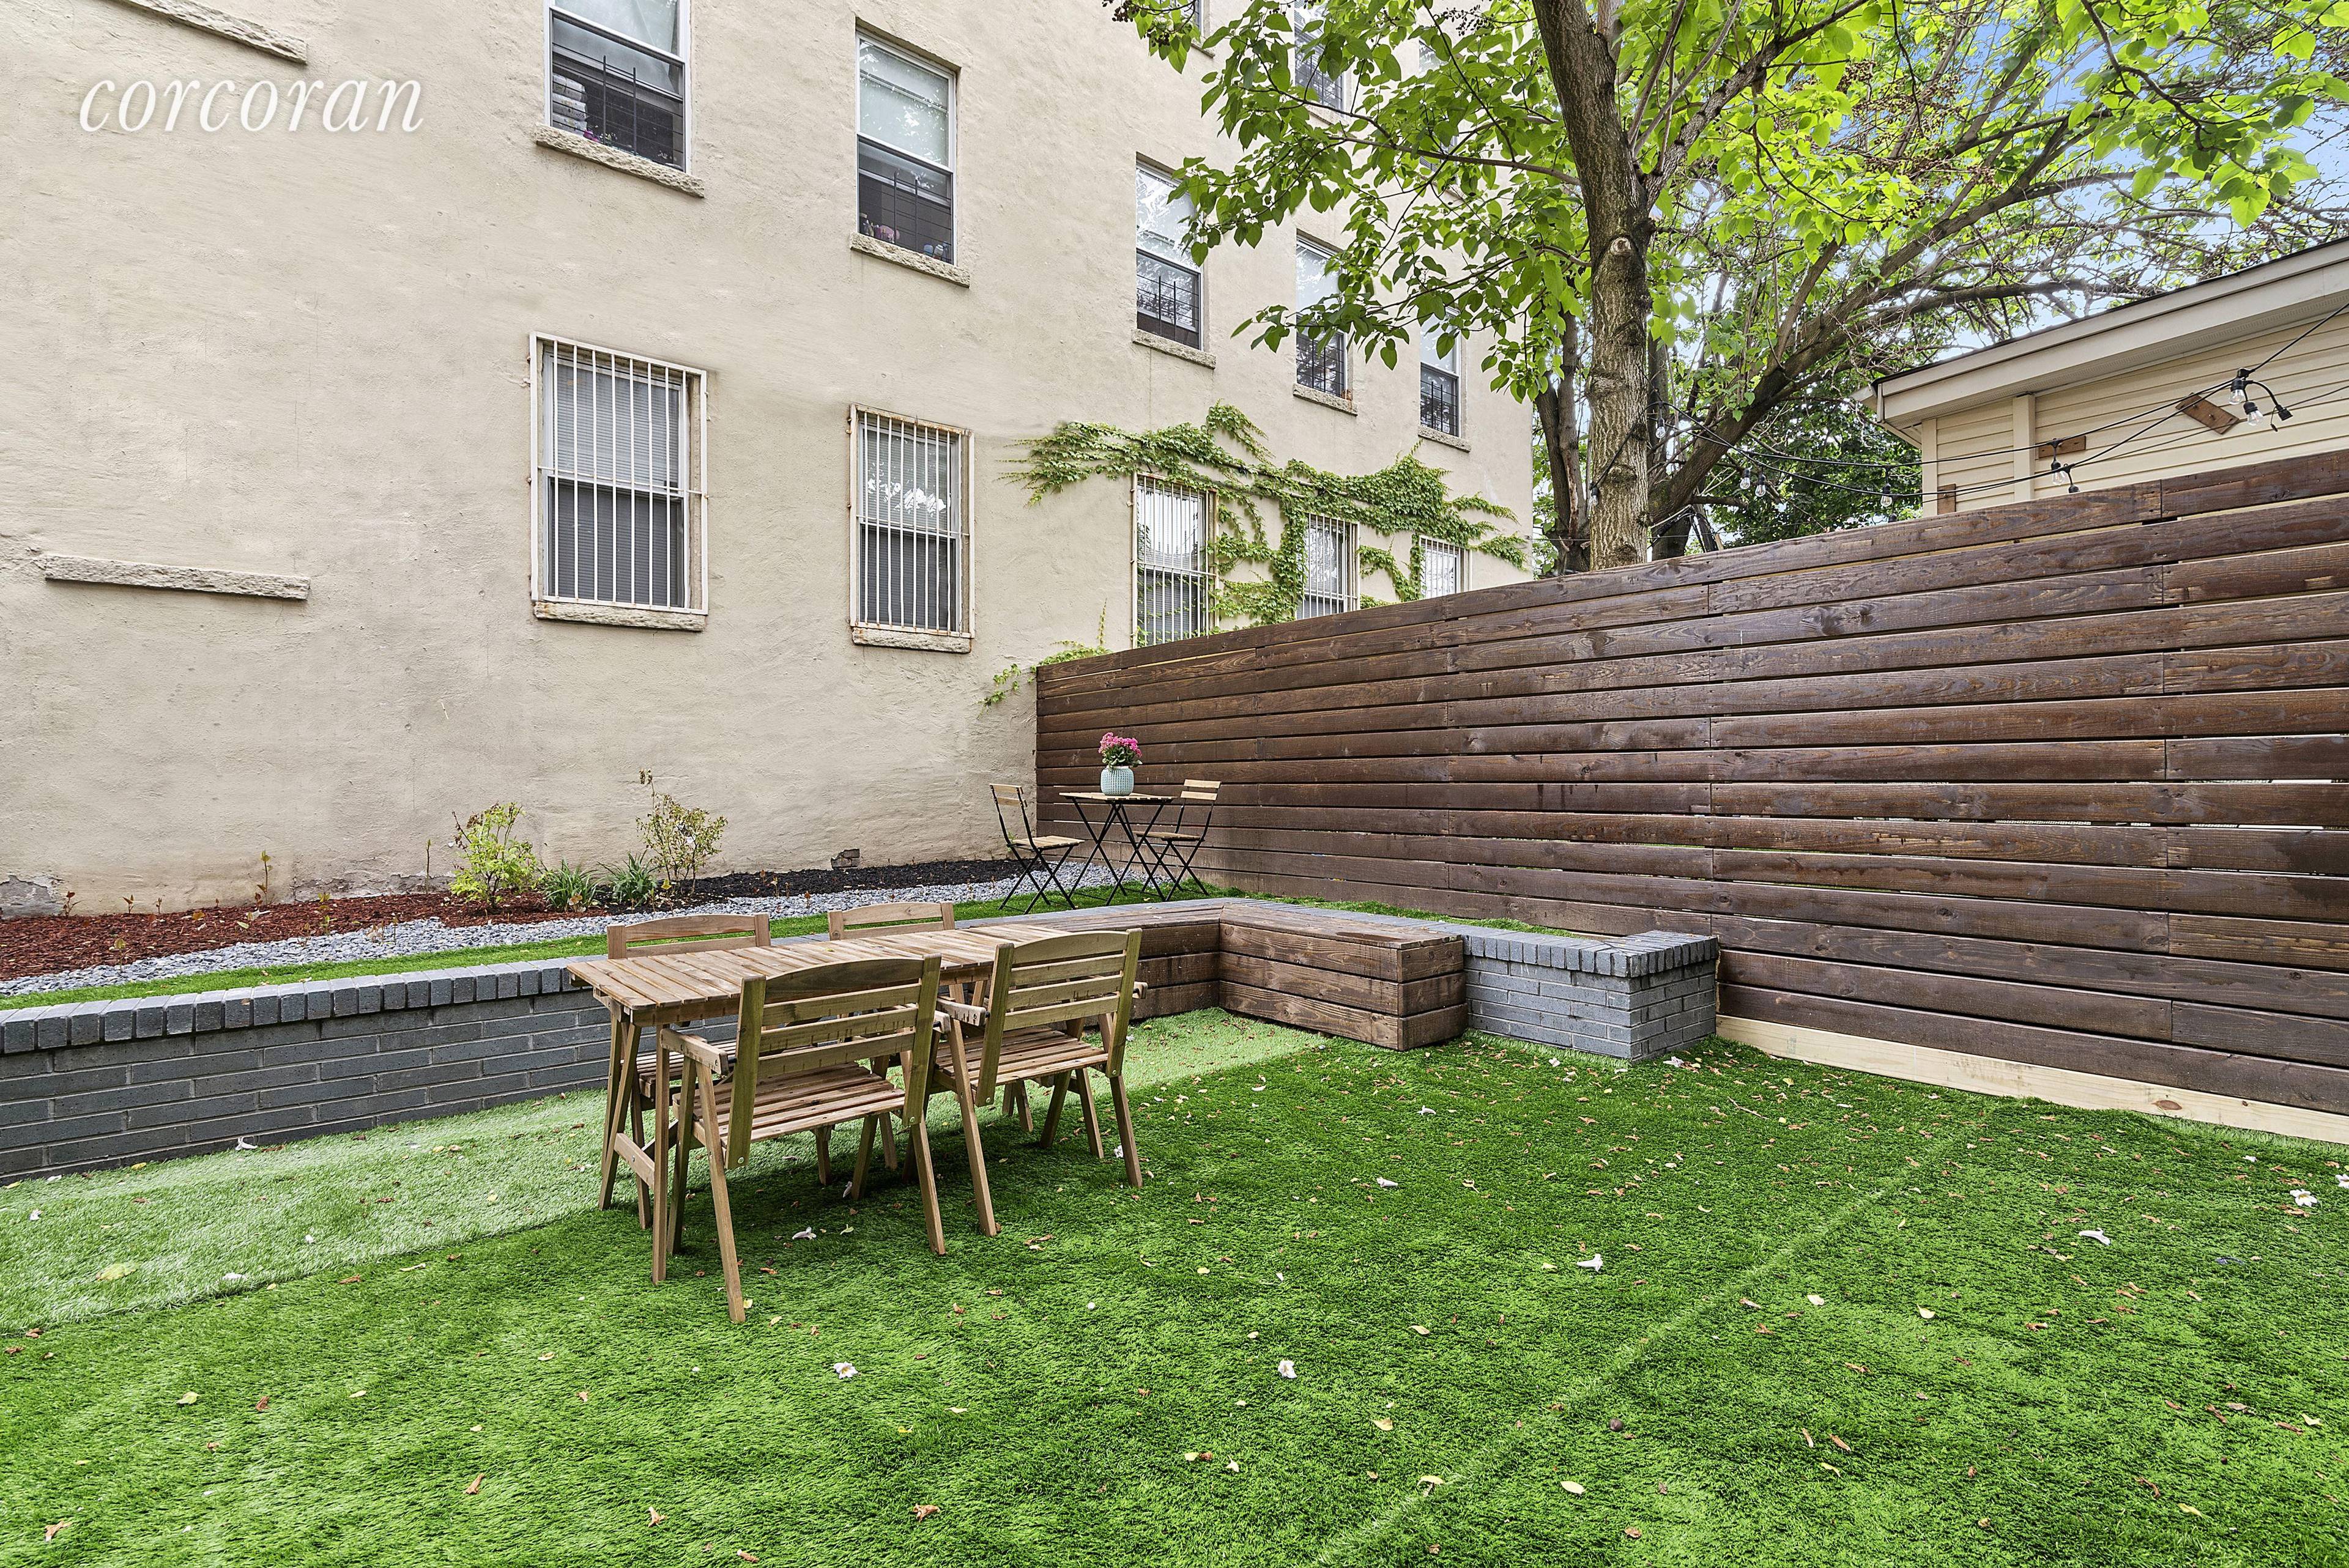 Unit 1 at 1089 Dekalb Ave is a two bedroom, one and a half bathroom DUPLEX, with 1, 285 square feet of glorious floor space, two exposures, central heat and ...